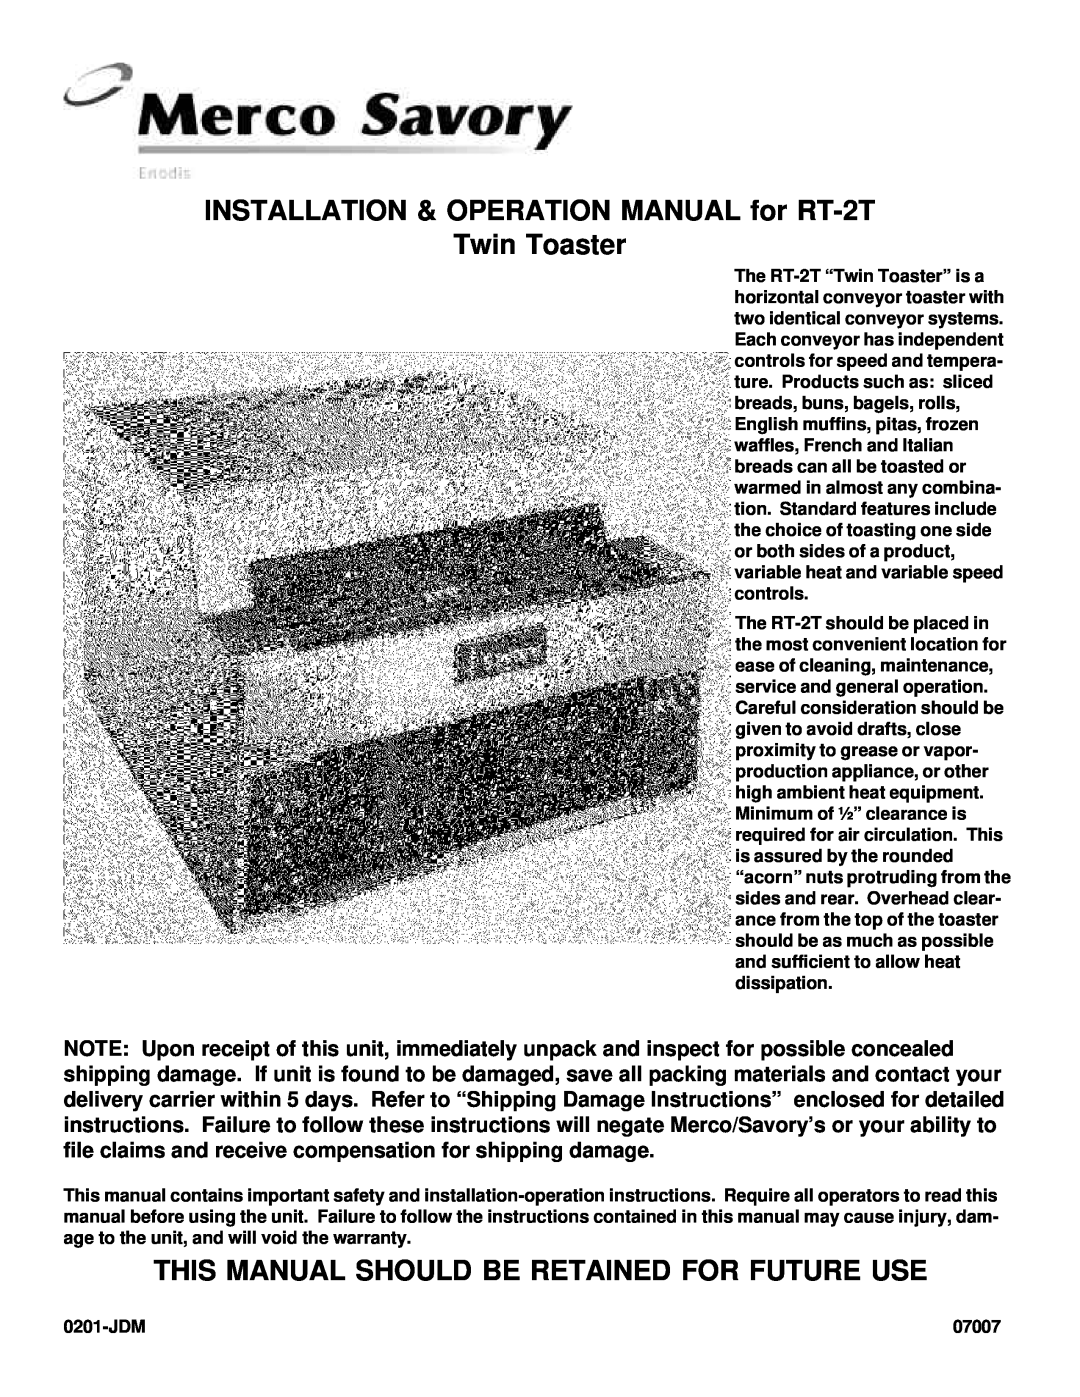 Merco Savory INSTALLATION & OPERATION MANUAL for RT-2T Twin Toaster, This Manual Should Be Retained For Future Use 